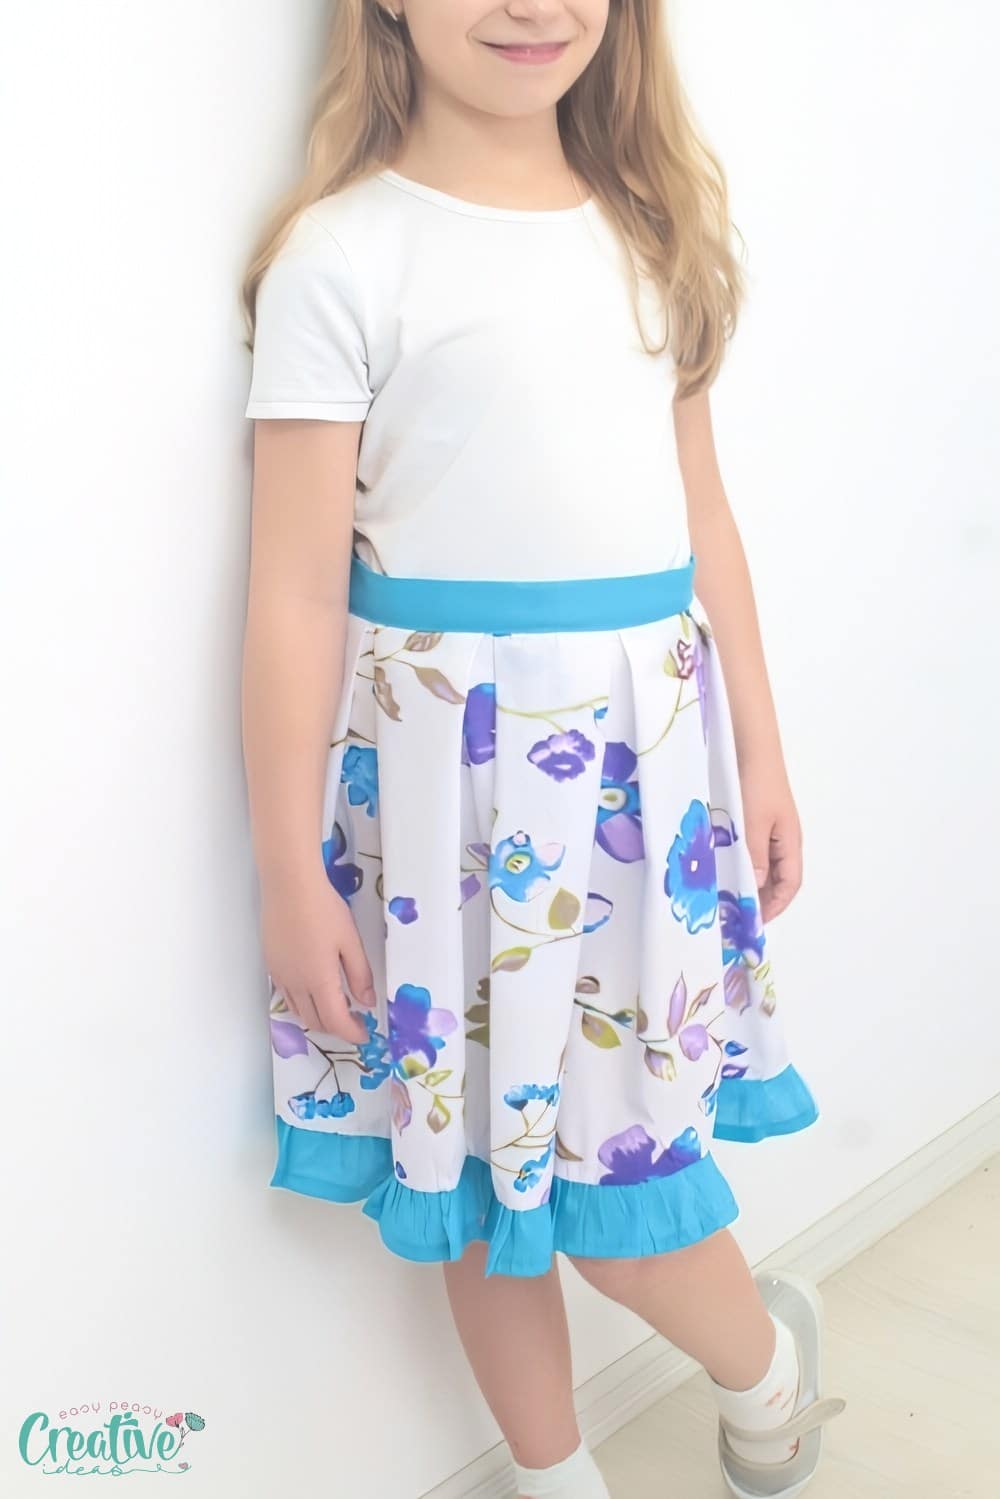 Skirt with pleats on a little girl